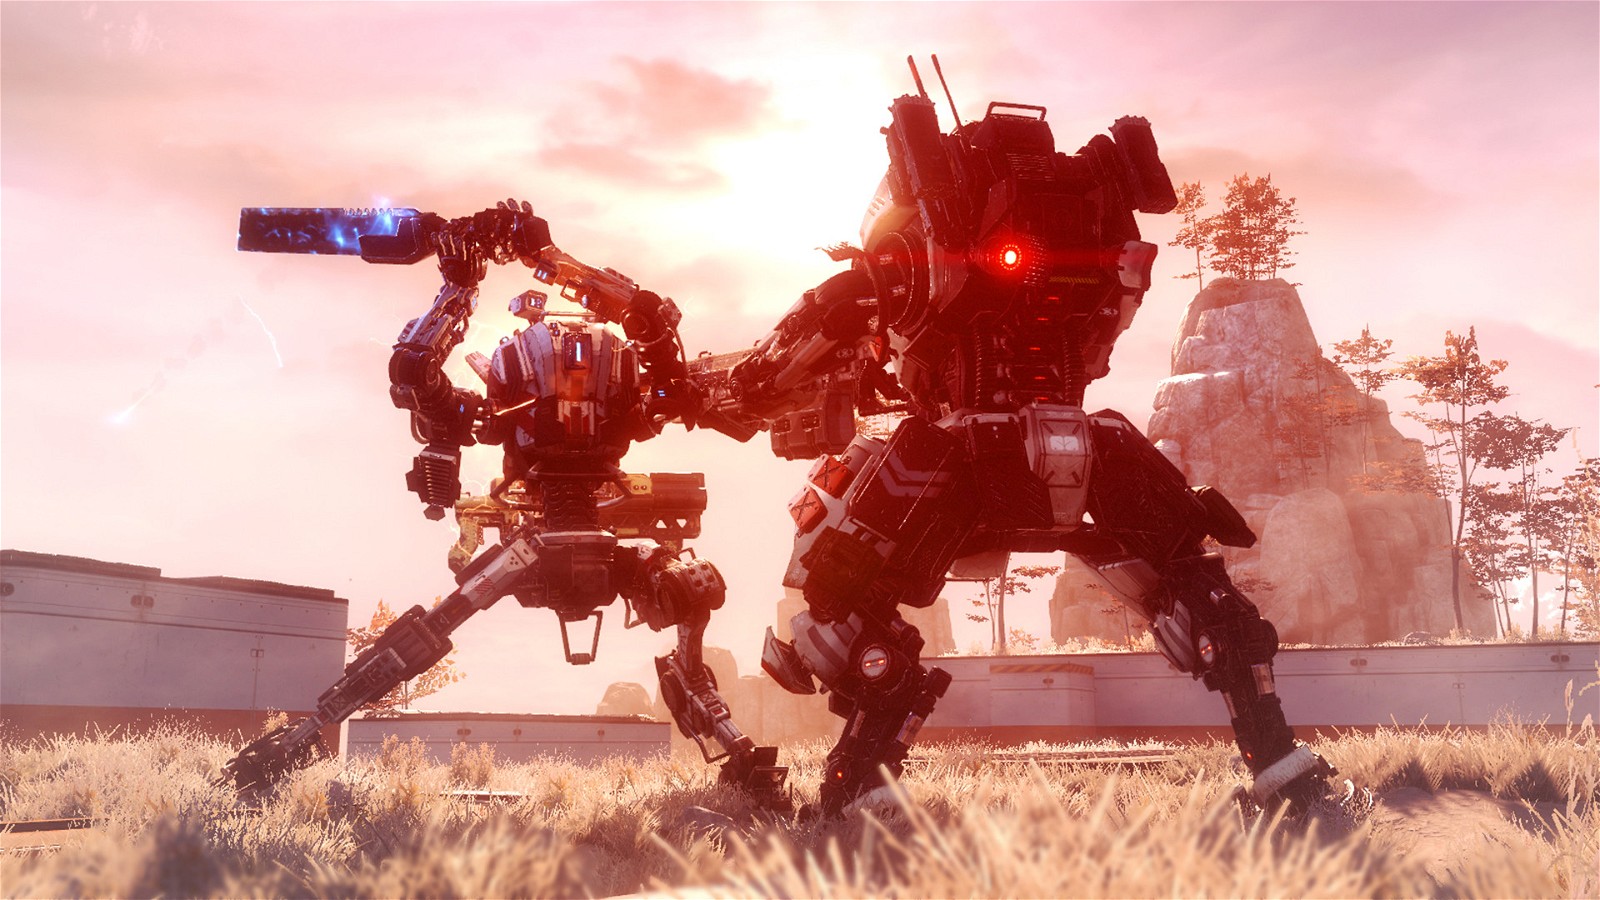 Titanfall 2 stands as an example in the gaming industry that staying true to one's creative vision always pays off